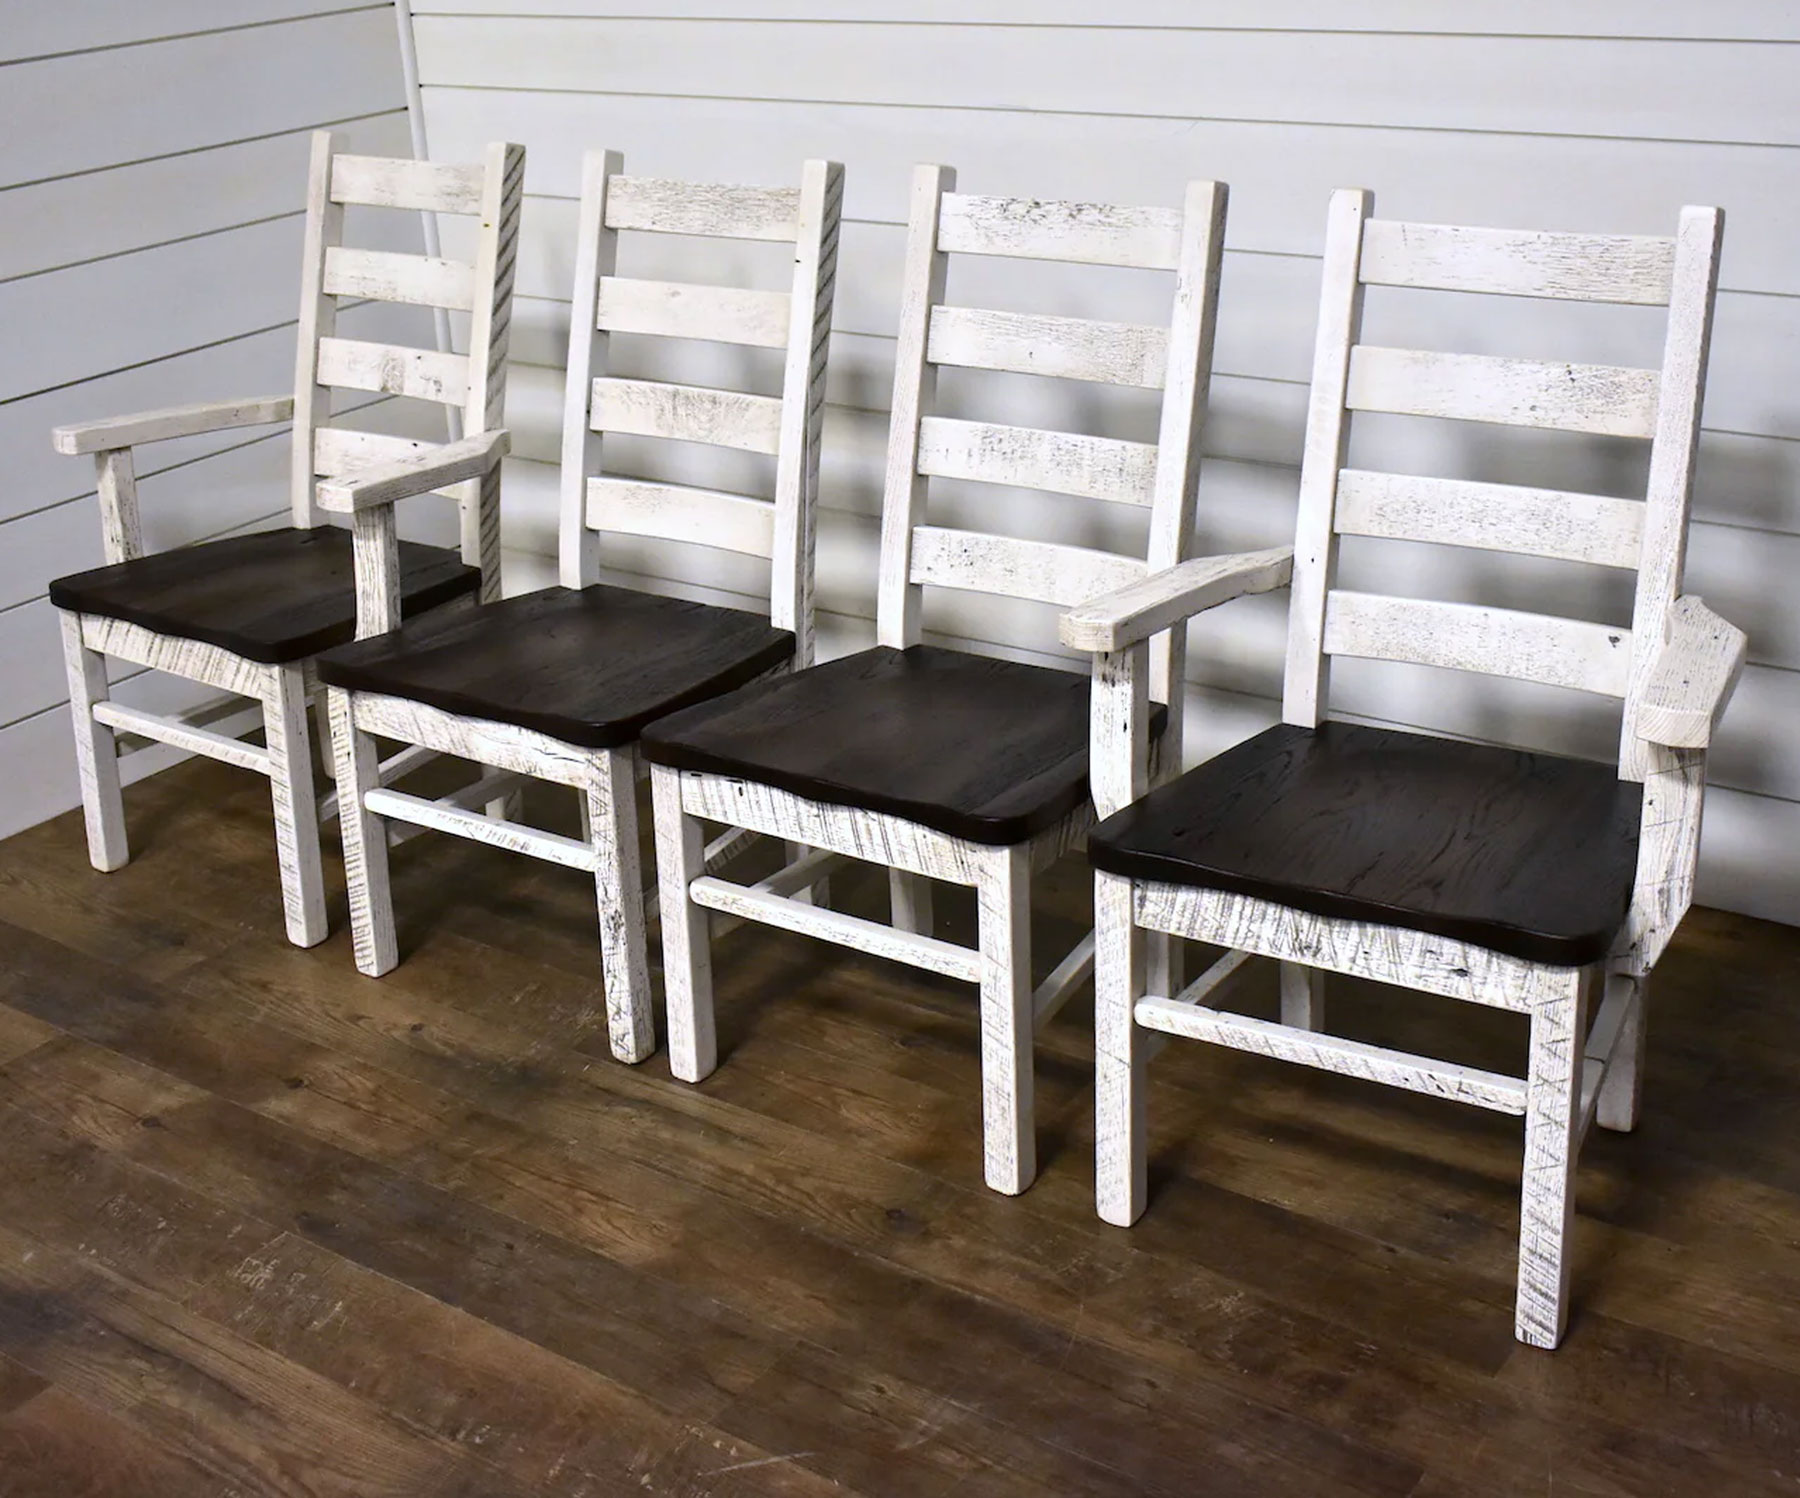 (2) Potomac Arm Chairs and (2) Potomac Side Dining Chairs in Faux Barn Wood